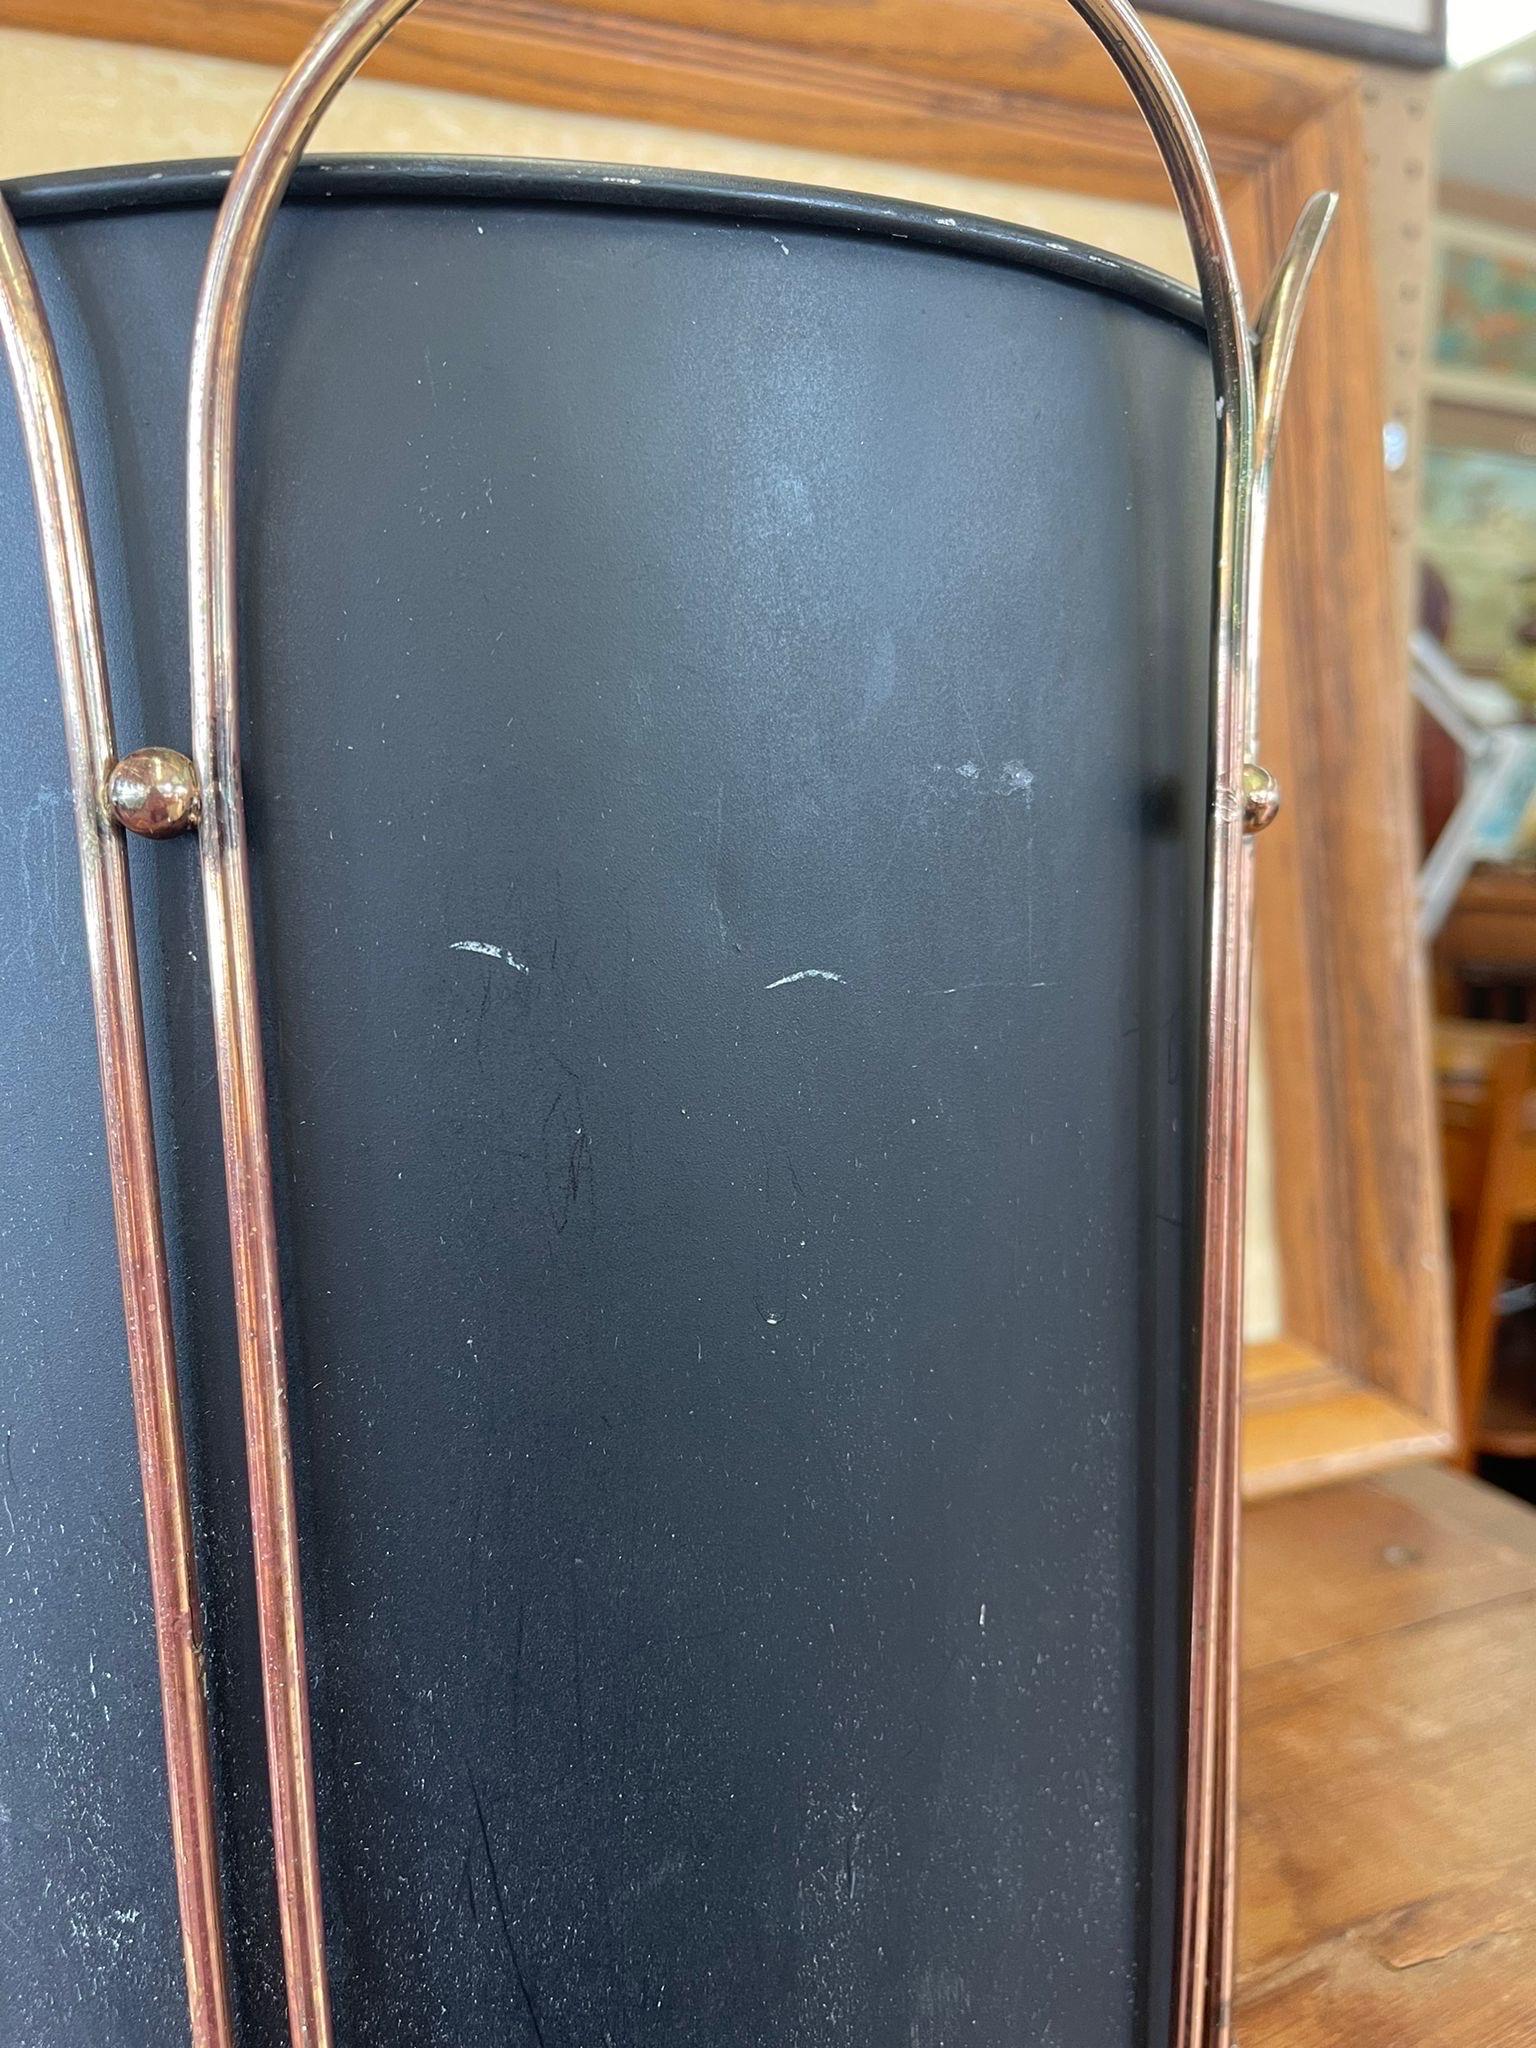 Vintage Black Trash Bin With Gold Toned Accents In Good Condition For Sale In Seattle, WA